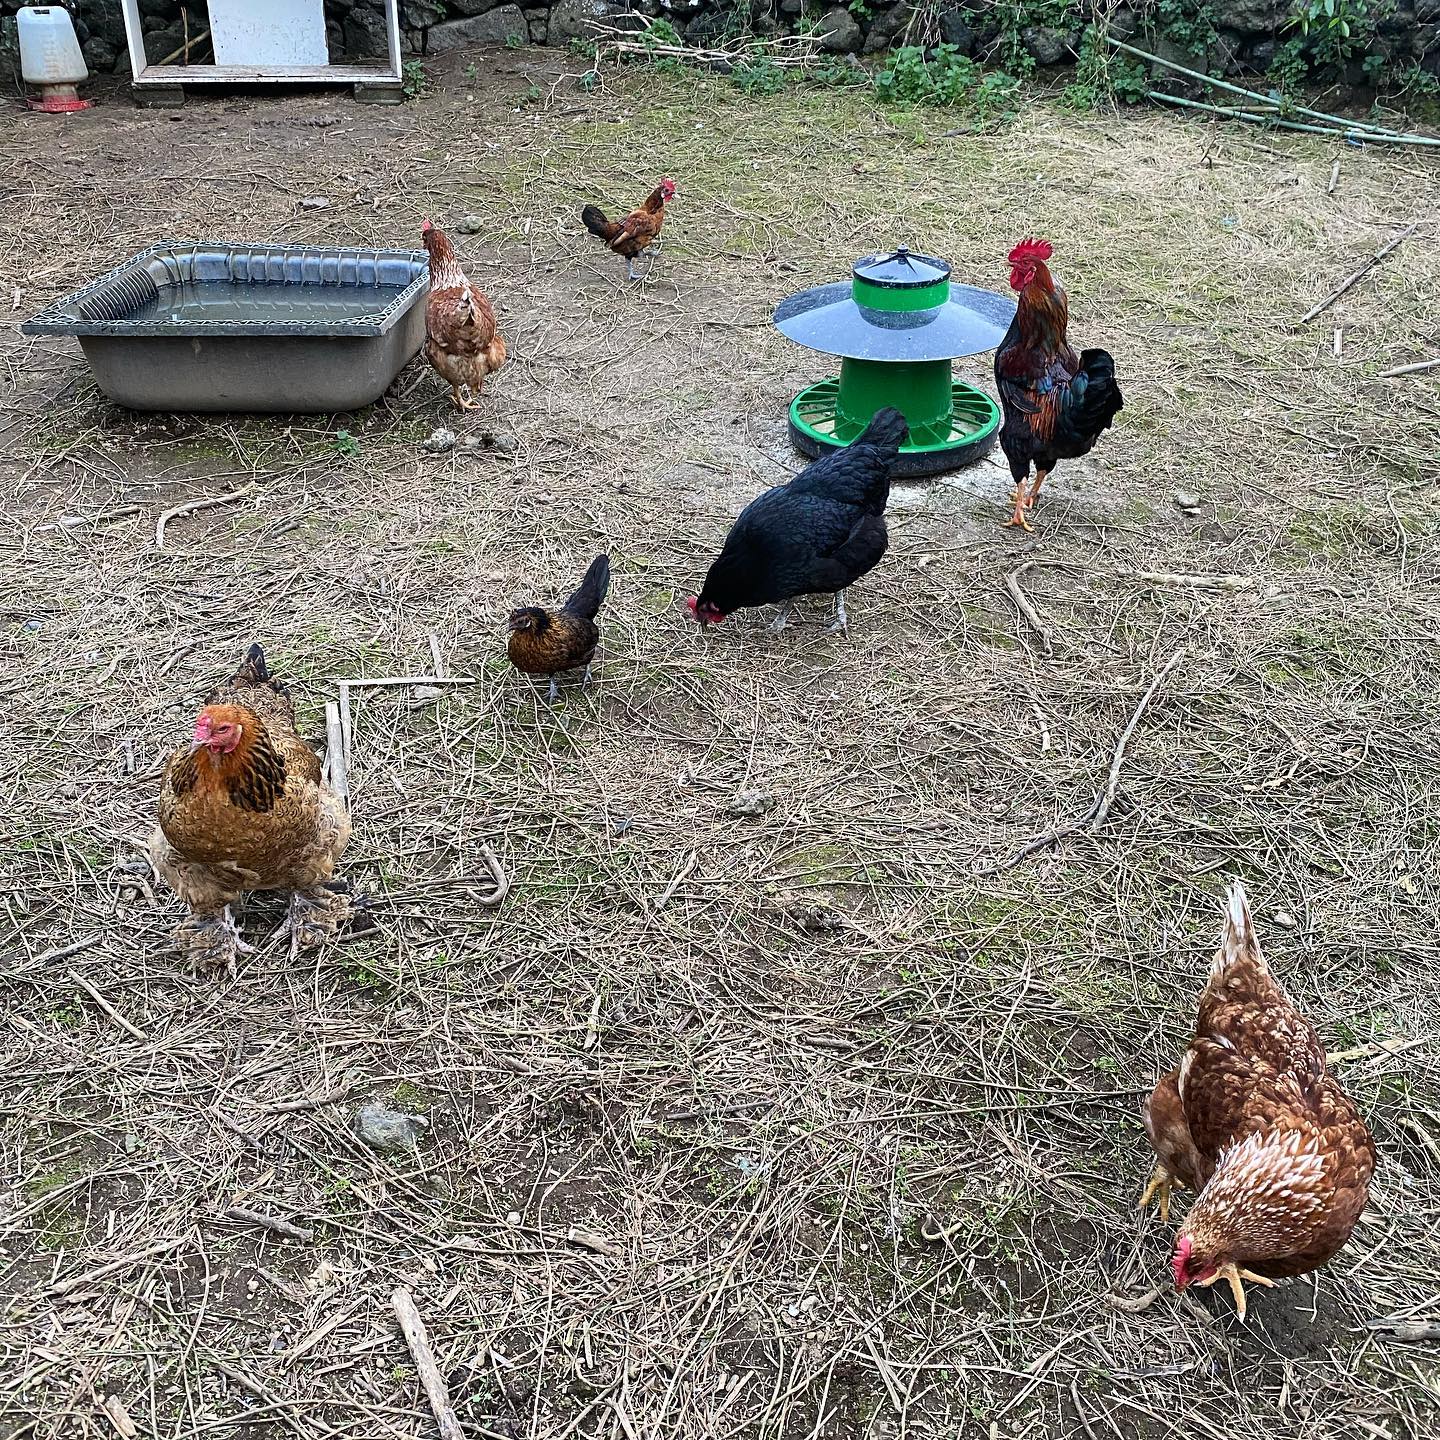 My after work therapy, feeding some bread to the chickens 🐓